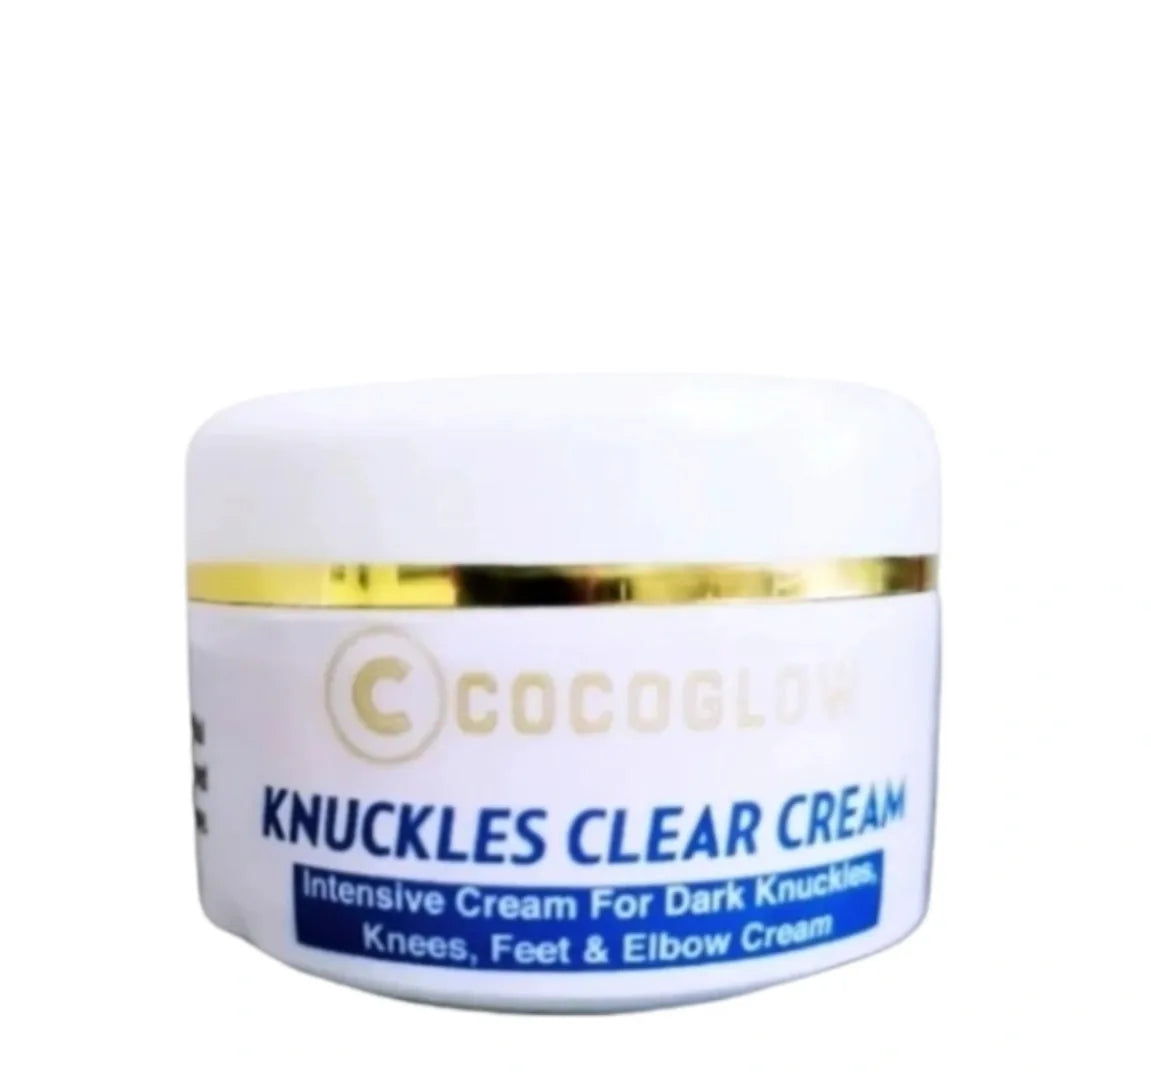 Knuckles clear cream